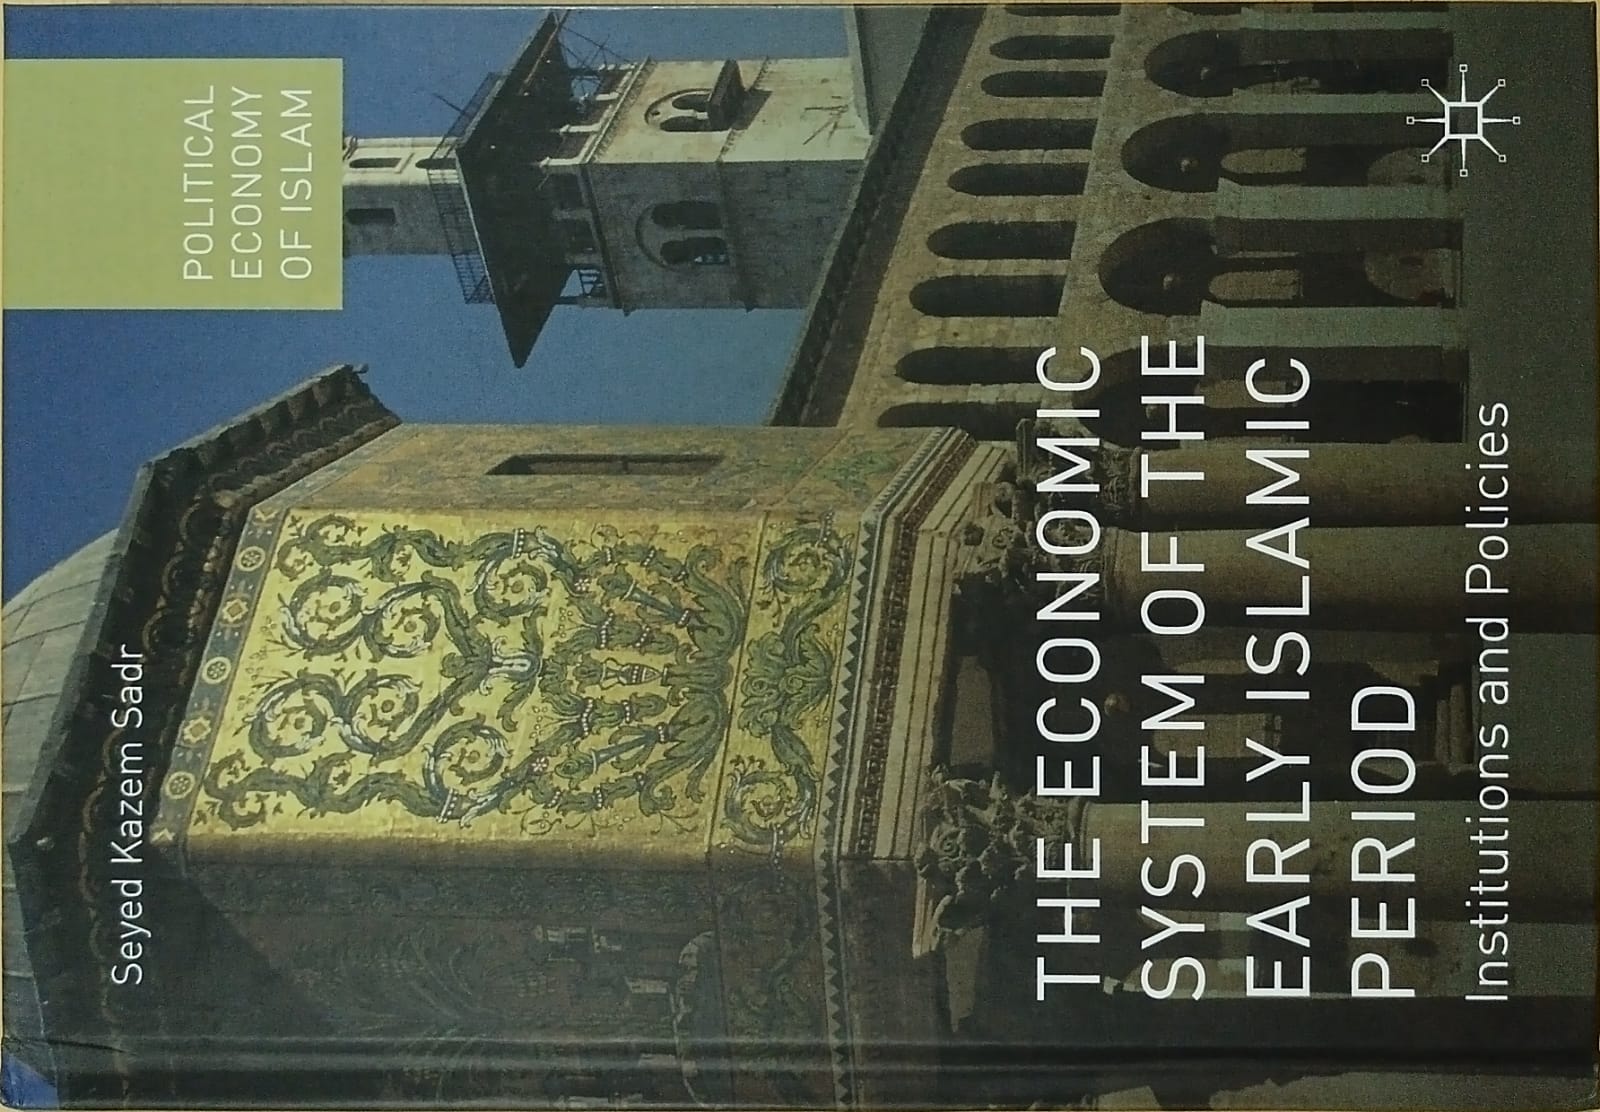 The economic system of the early islamic period : institutions and policies